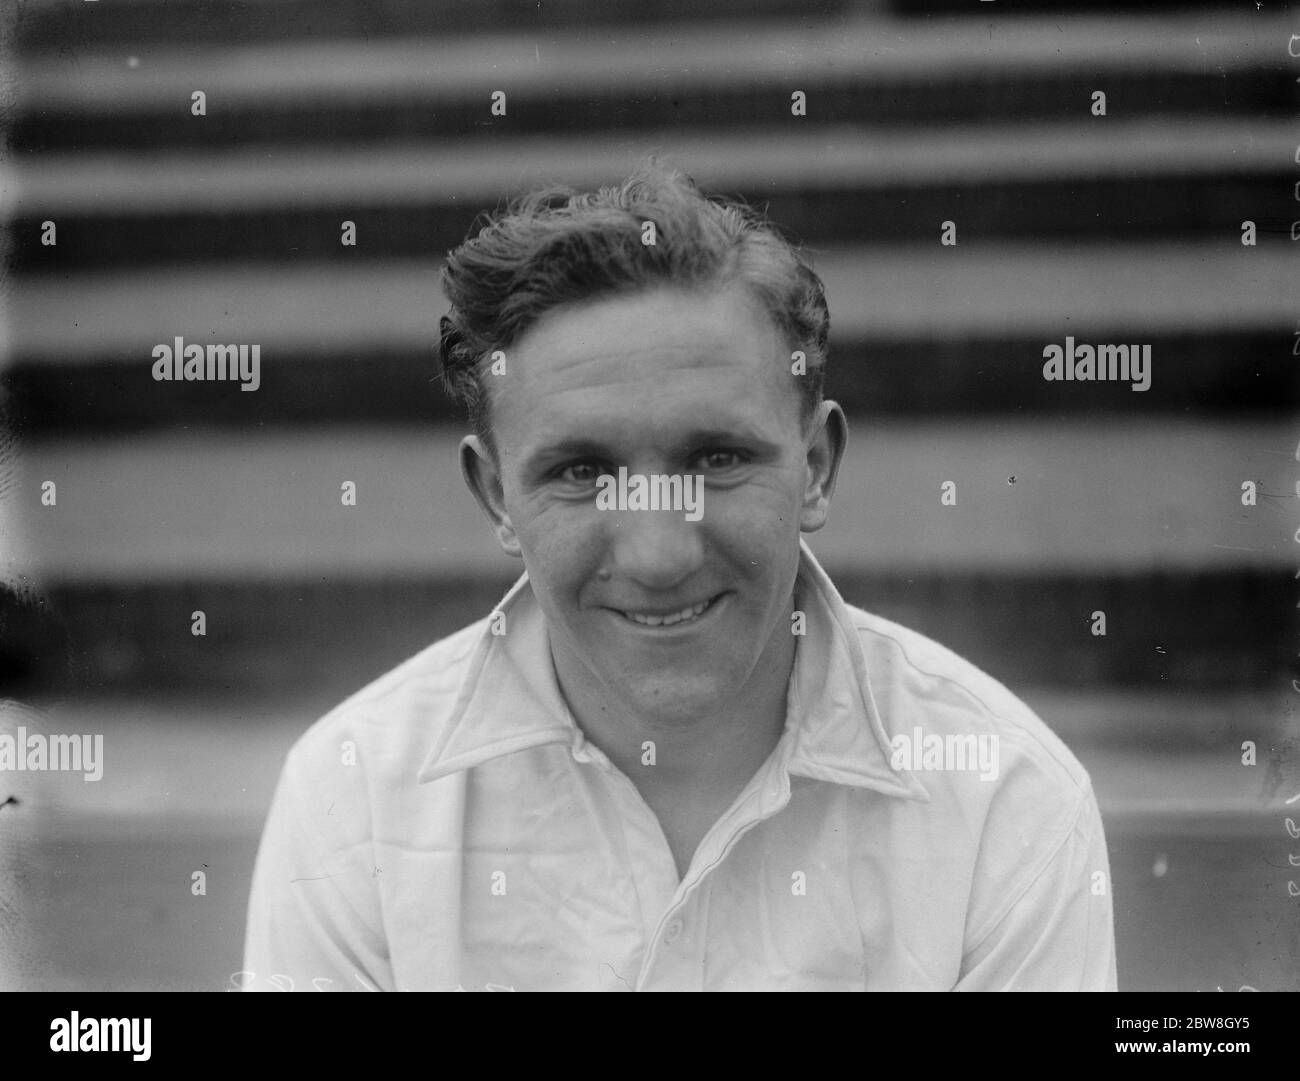 Surrey County Cricket Club players . McMurray - Surrey cricketer and Tranmere Rovers footballer . 22 April 1933 Stock Photo